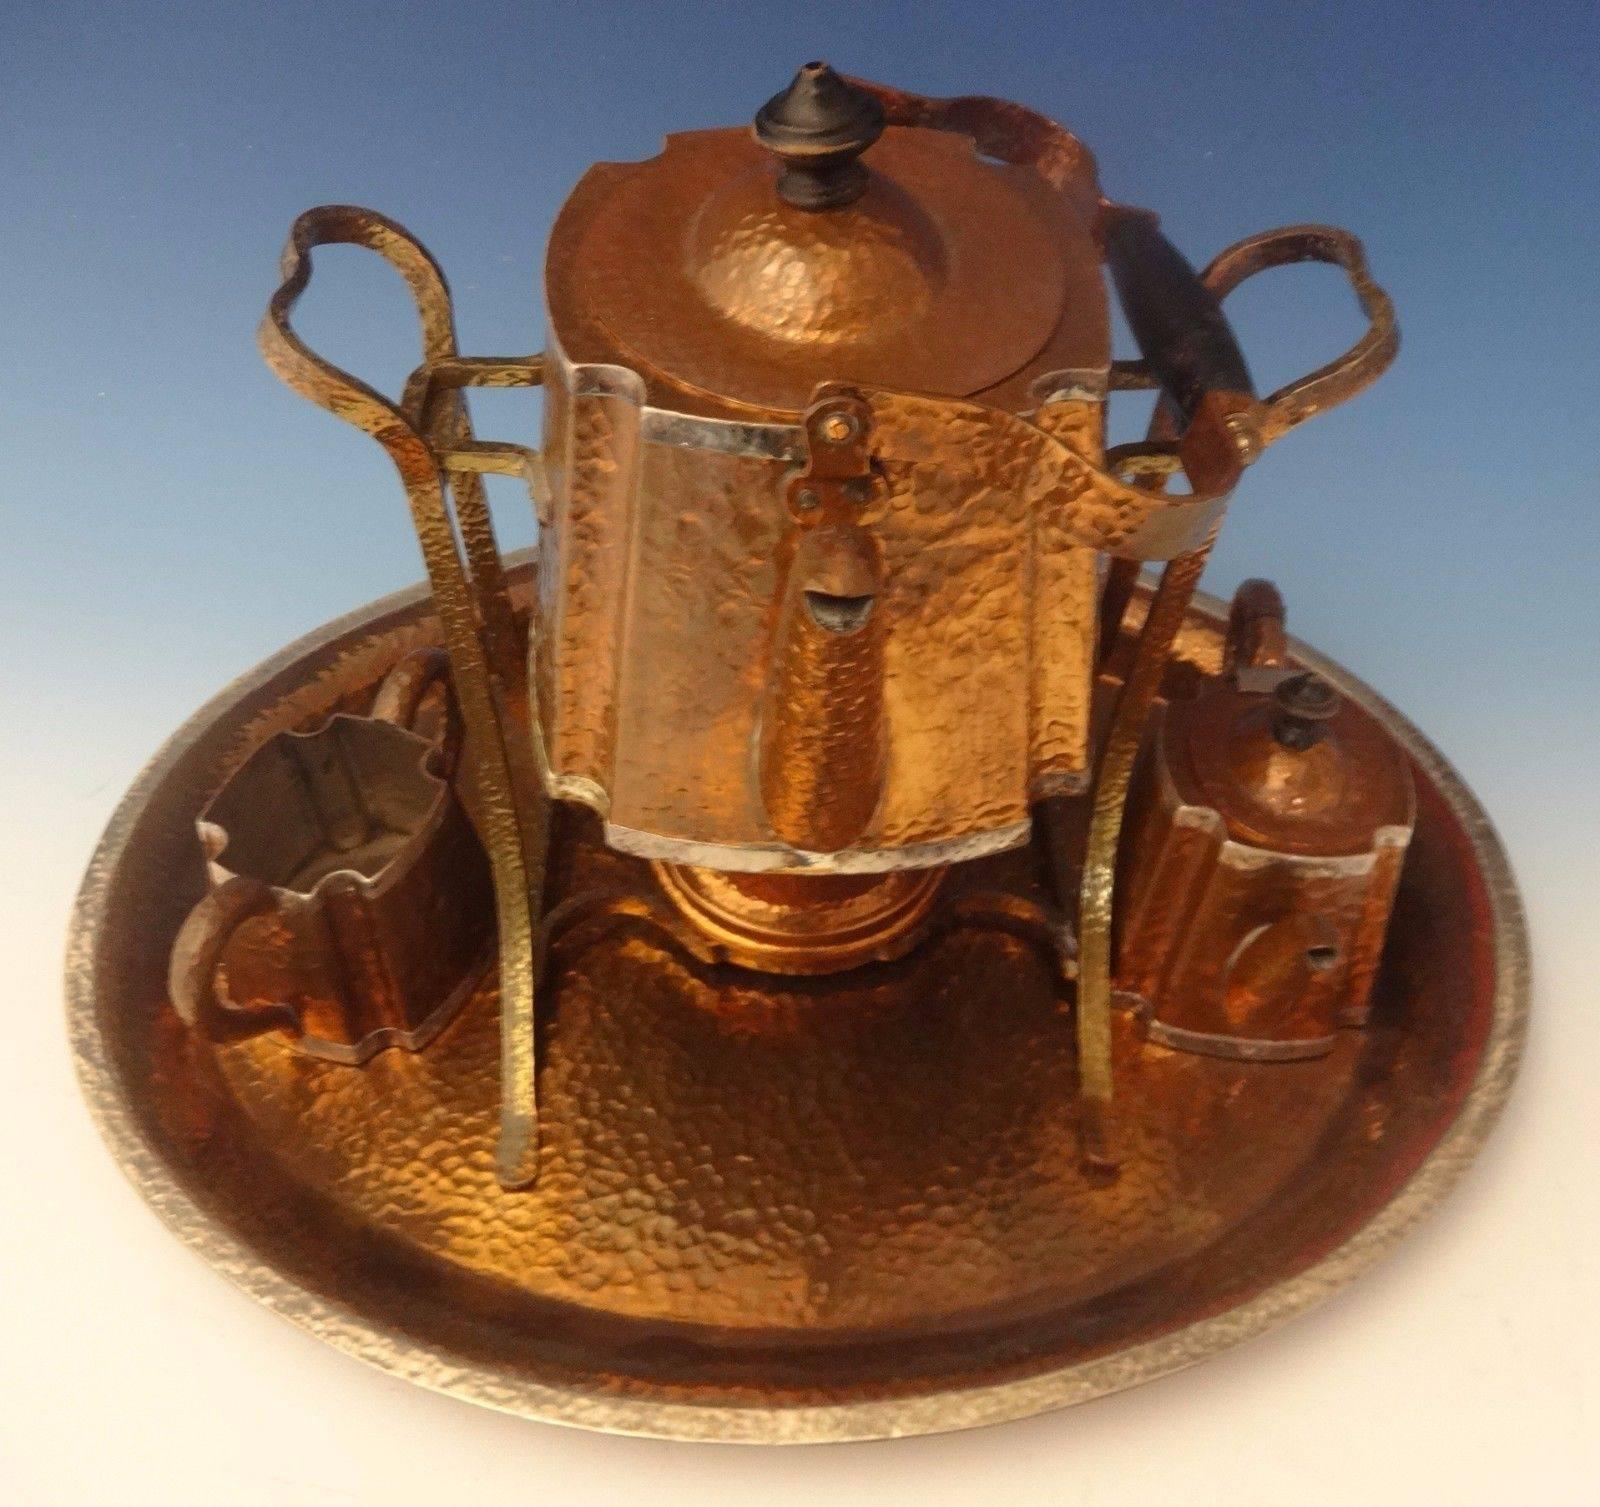 Joseph Heinrichs.

 This very impressive Arts & Crafts four-piece tea set was hand made by Joseph Heinrichs. It's made with hand-hammered copper with applied silver and brass. The set dates from about 1905. The set includes:

Tray: Measures 1